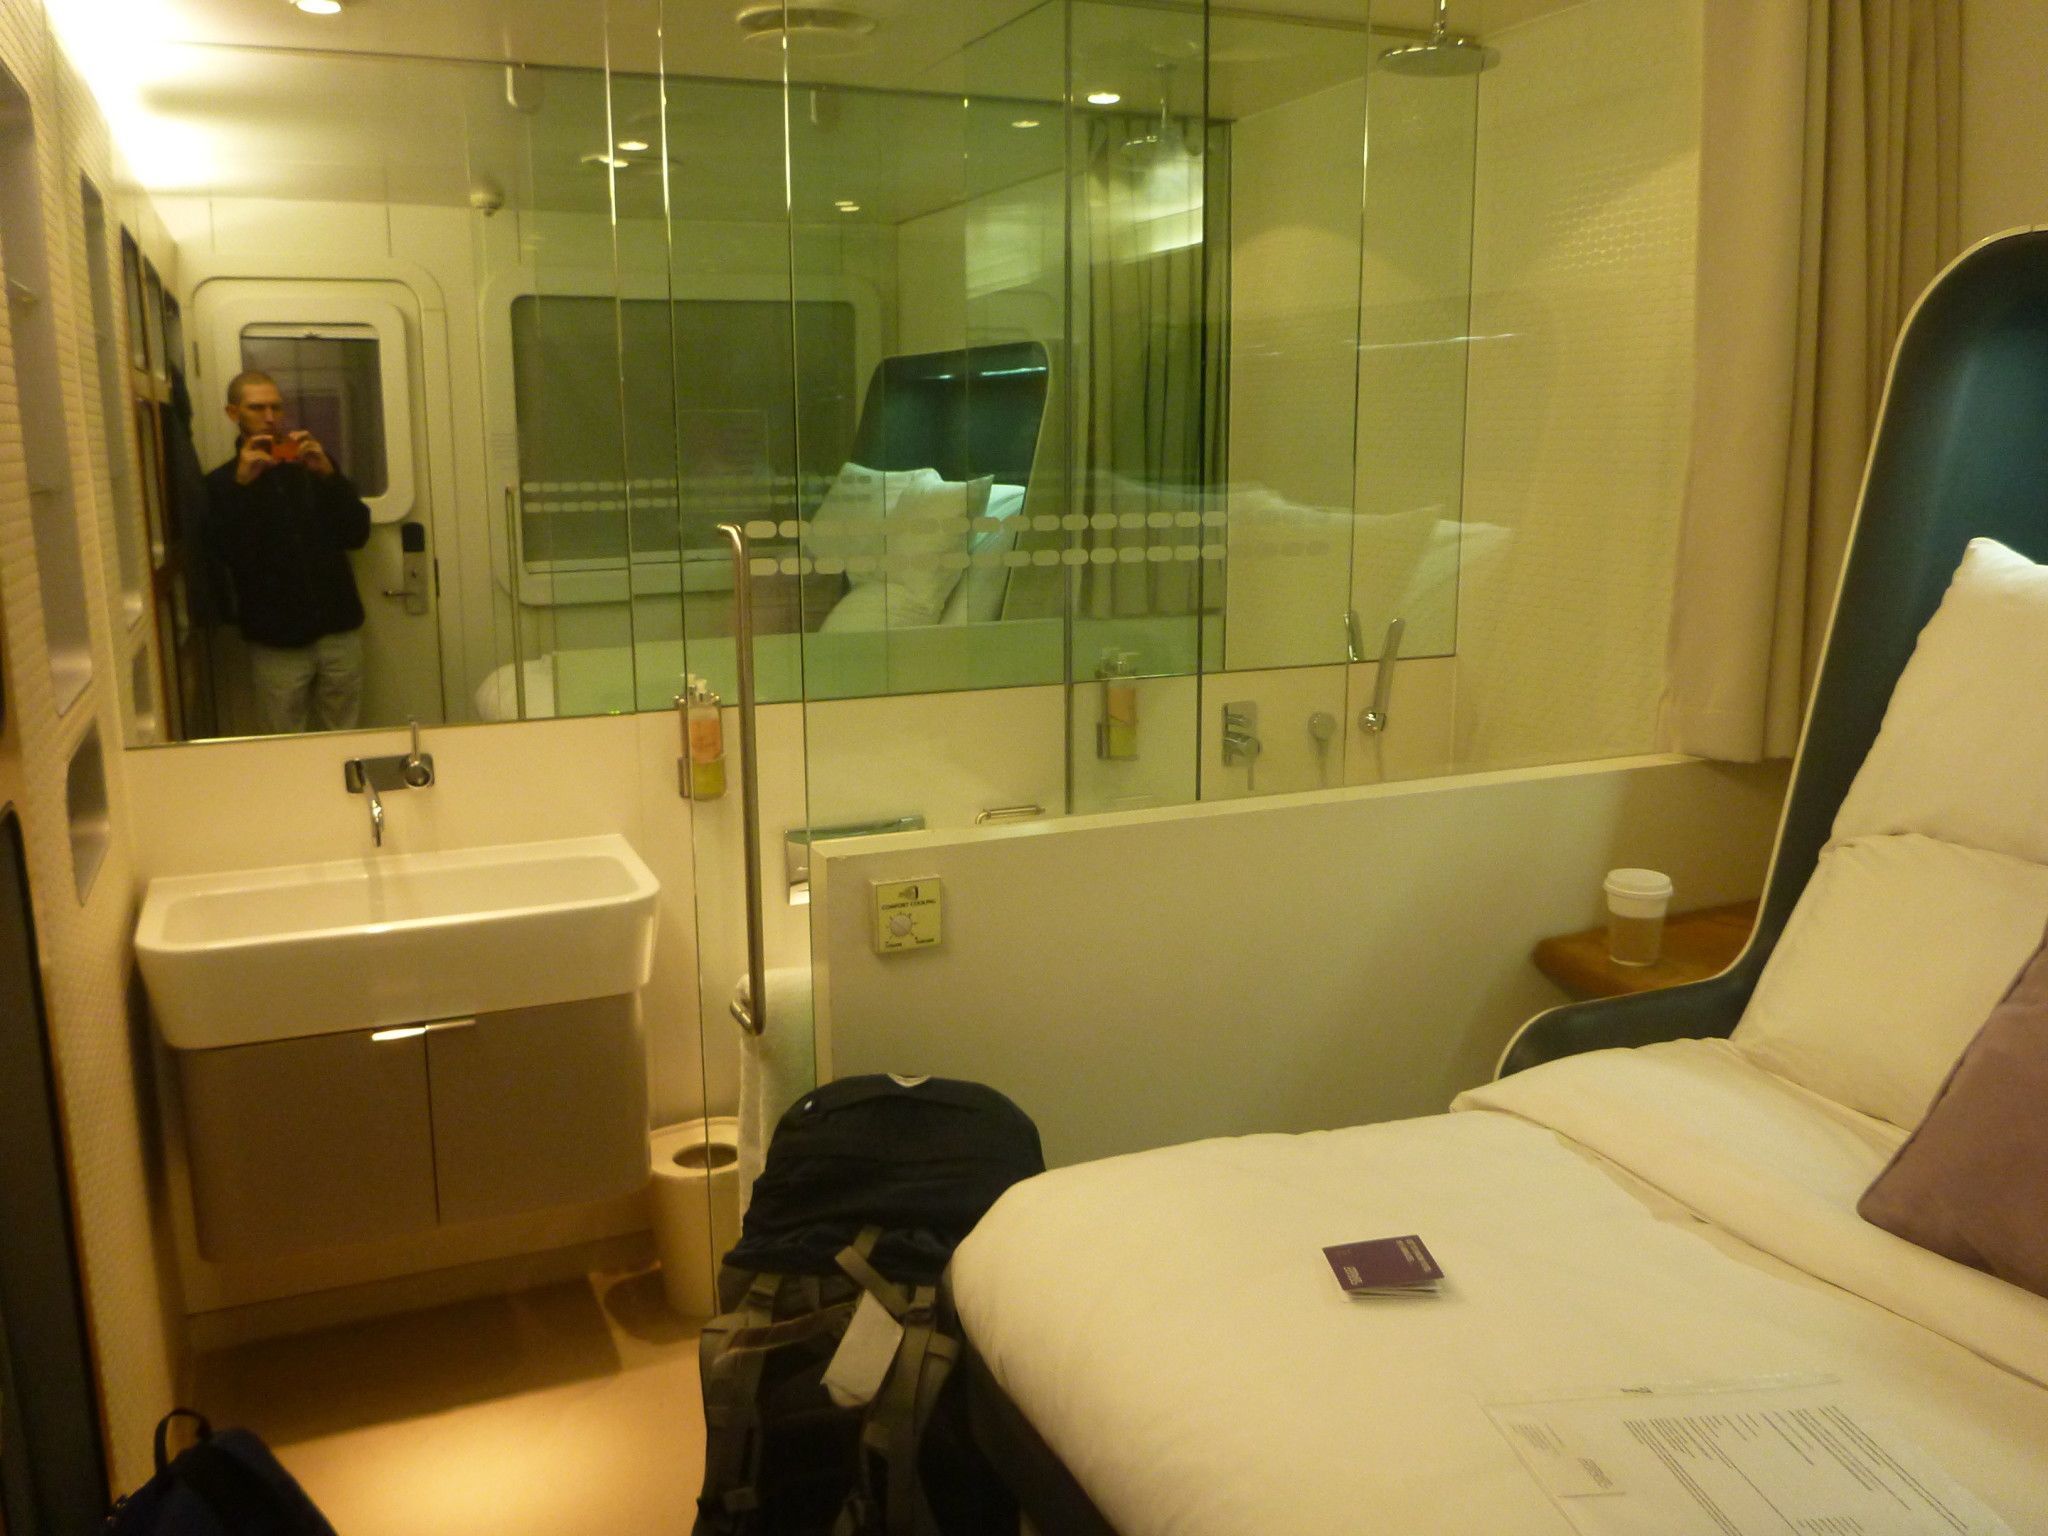 My Stay at the Yotel in Gatwick Airport, London, England